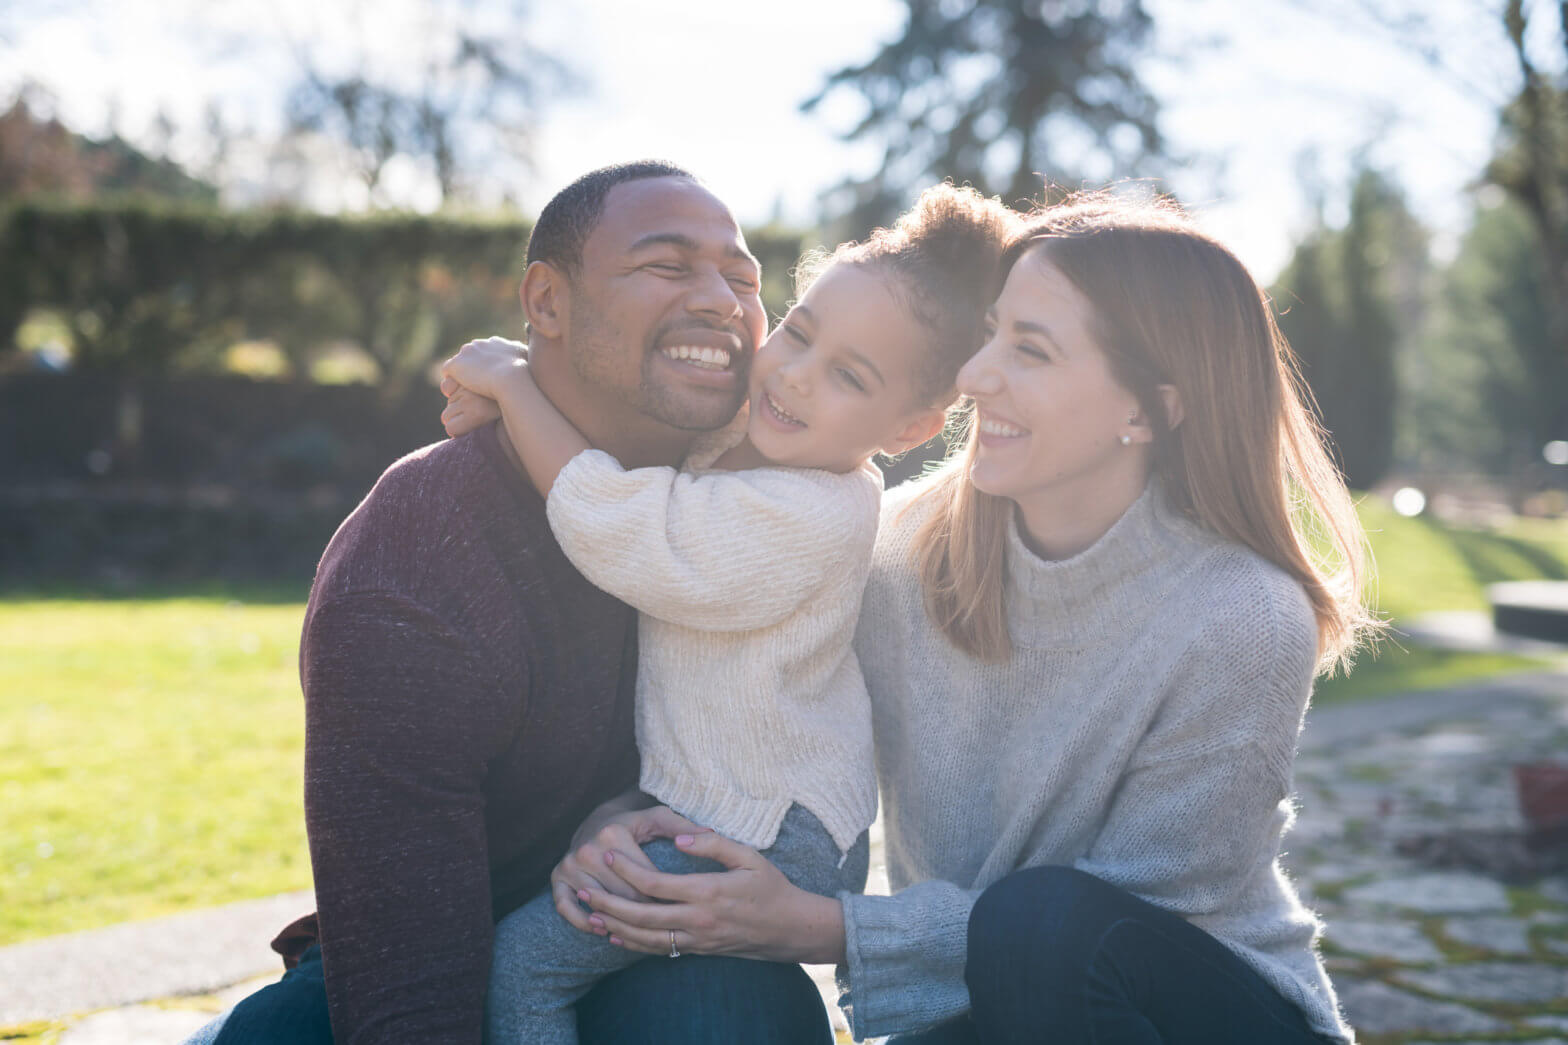 Portrait of a pre-school age girl and her parents sitting outside i the sunshine. Mom is white, dad is black, and they are all happy and affectionate as they laugh and smile at one another. They are sitting on a curb and there is a grassy area in the background.